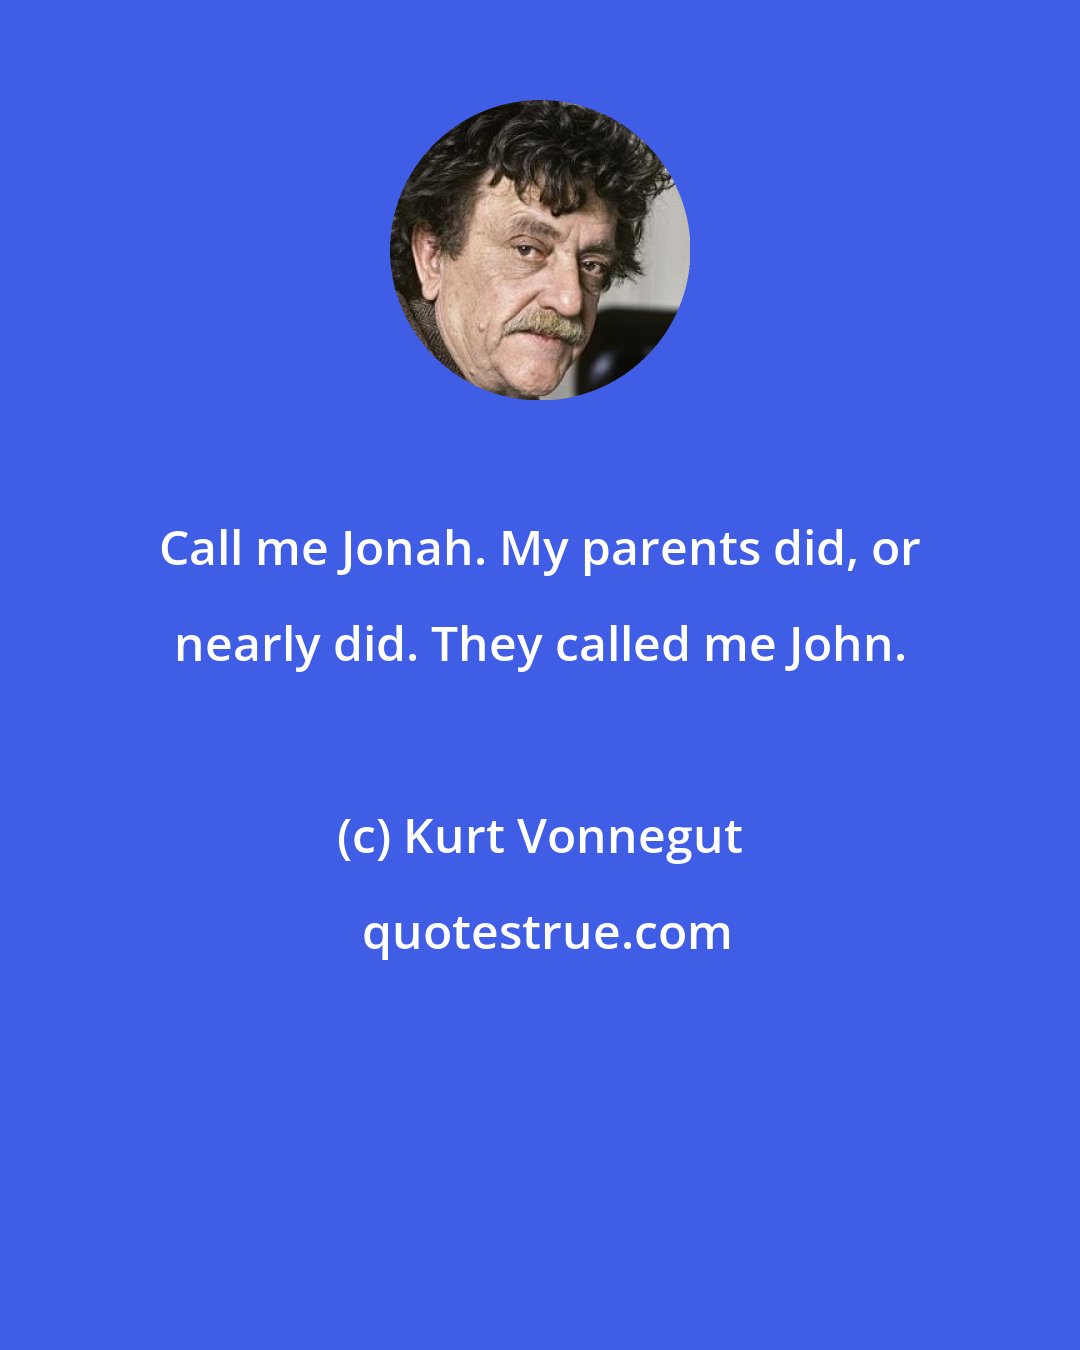 Kurt Vonnegut: Call me Jonah. My parents did, or nearly did. They called me John.